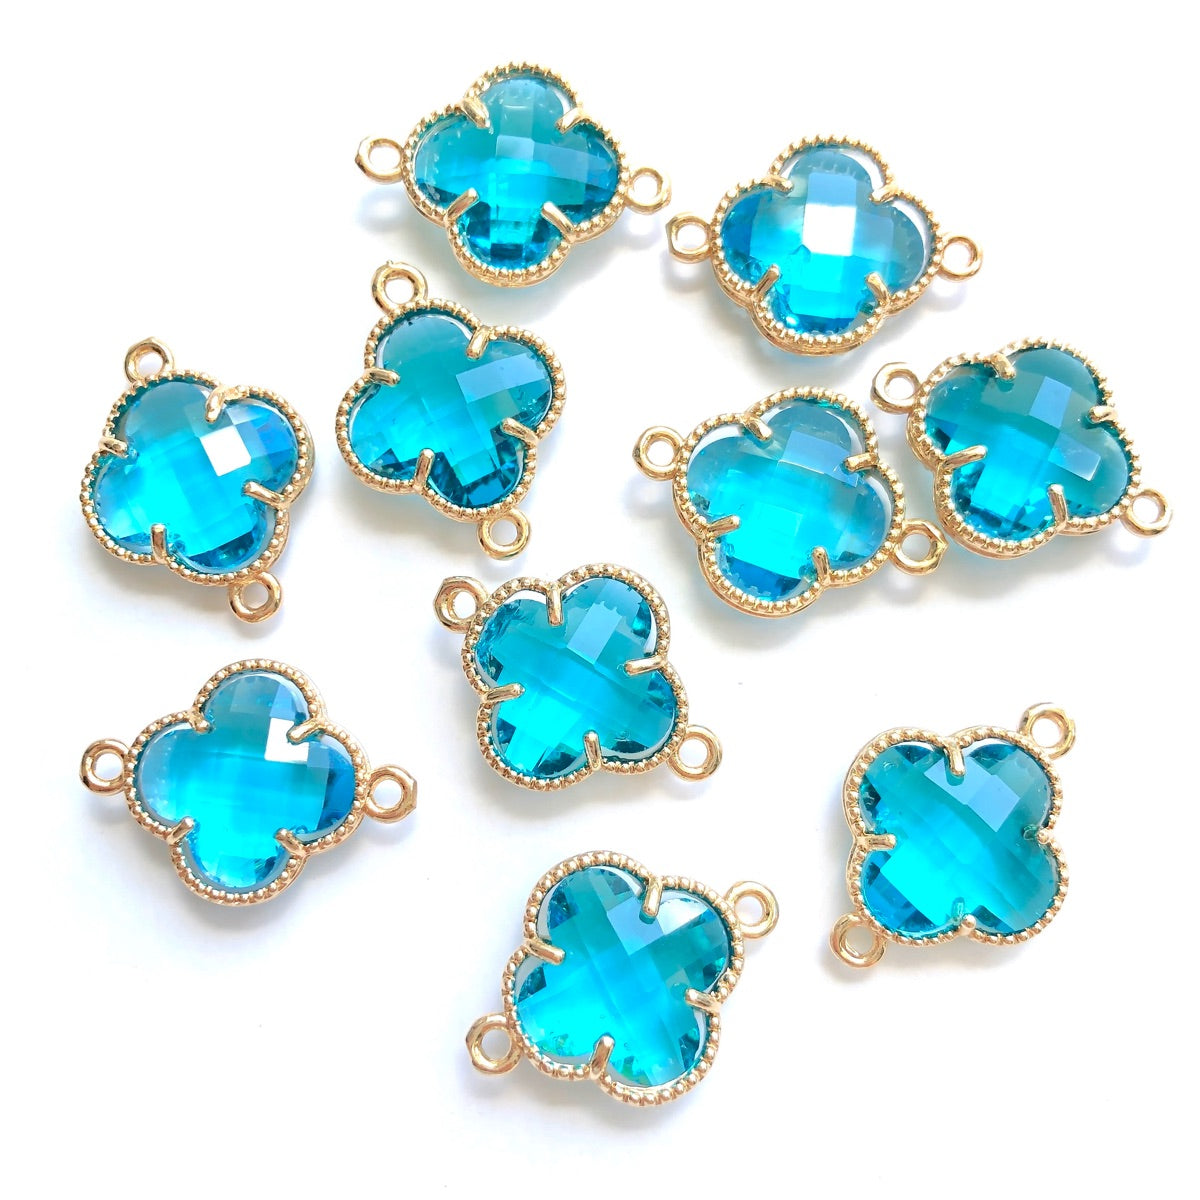 10pcs/Lot Gold Plated Glass Crystal Clover Flower Connectors Lake Blue Stone Charms Flower Glass Beads New Charms Arrivals Charms Beads Beyond